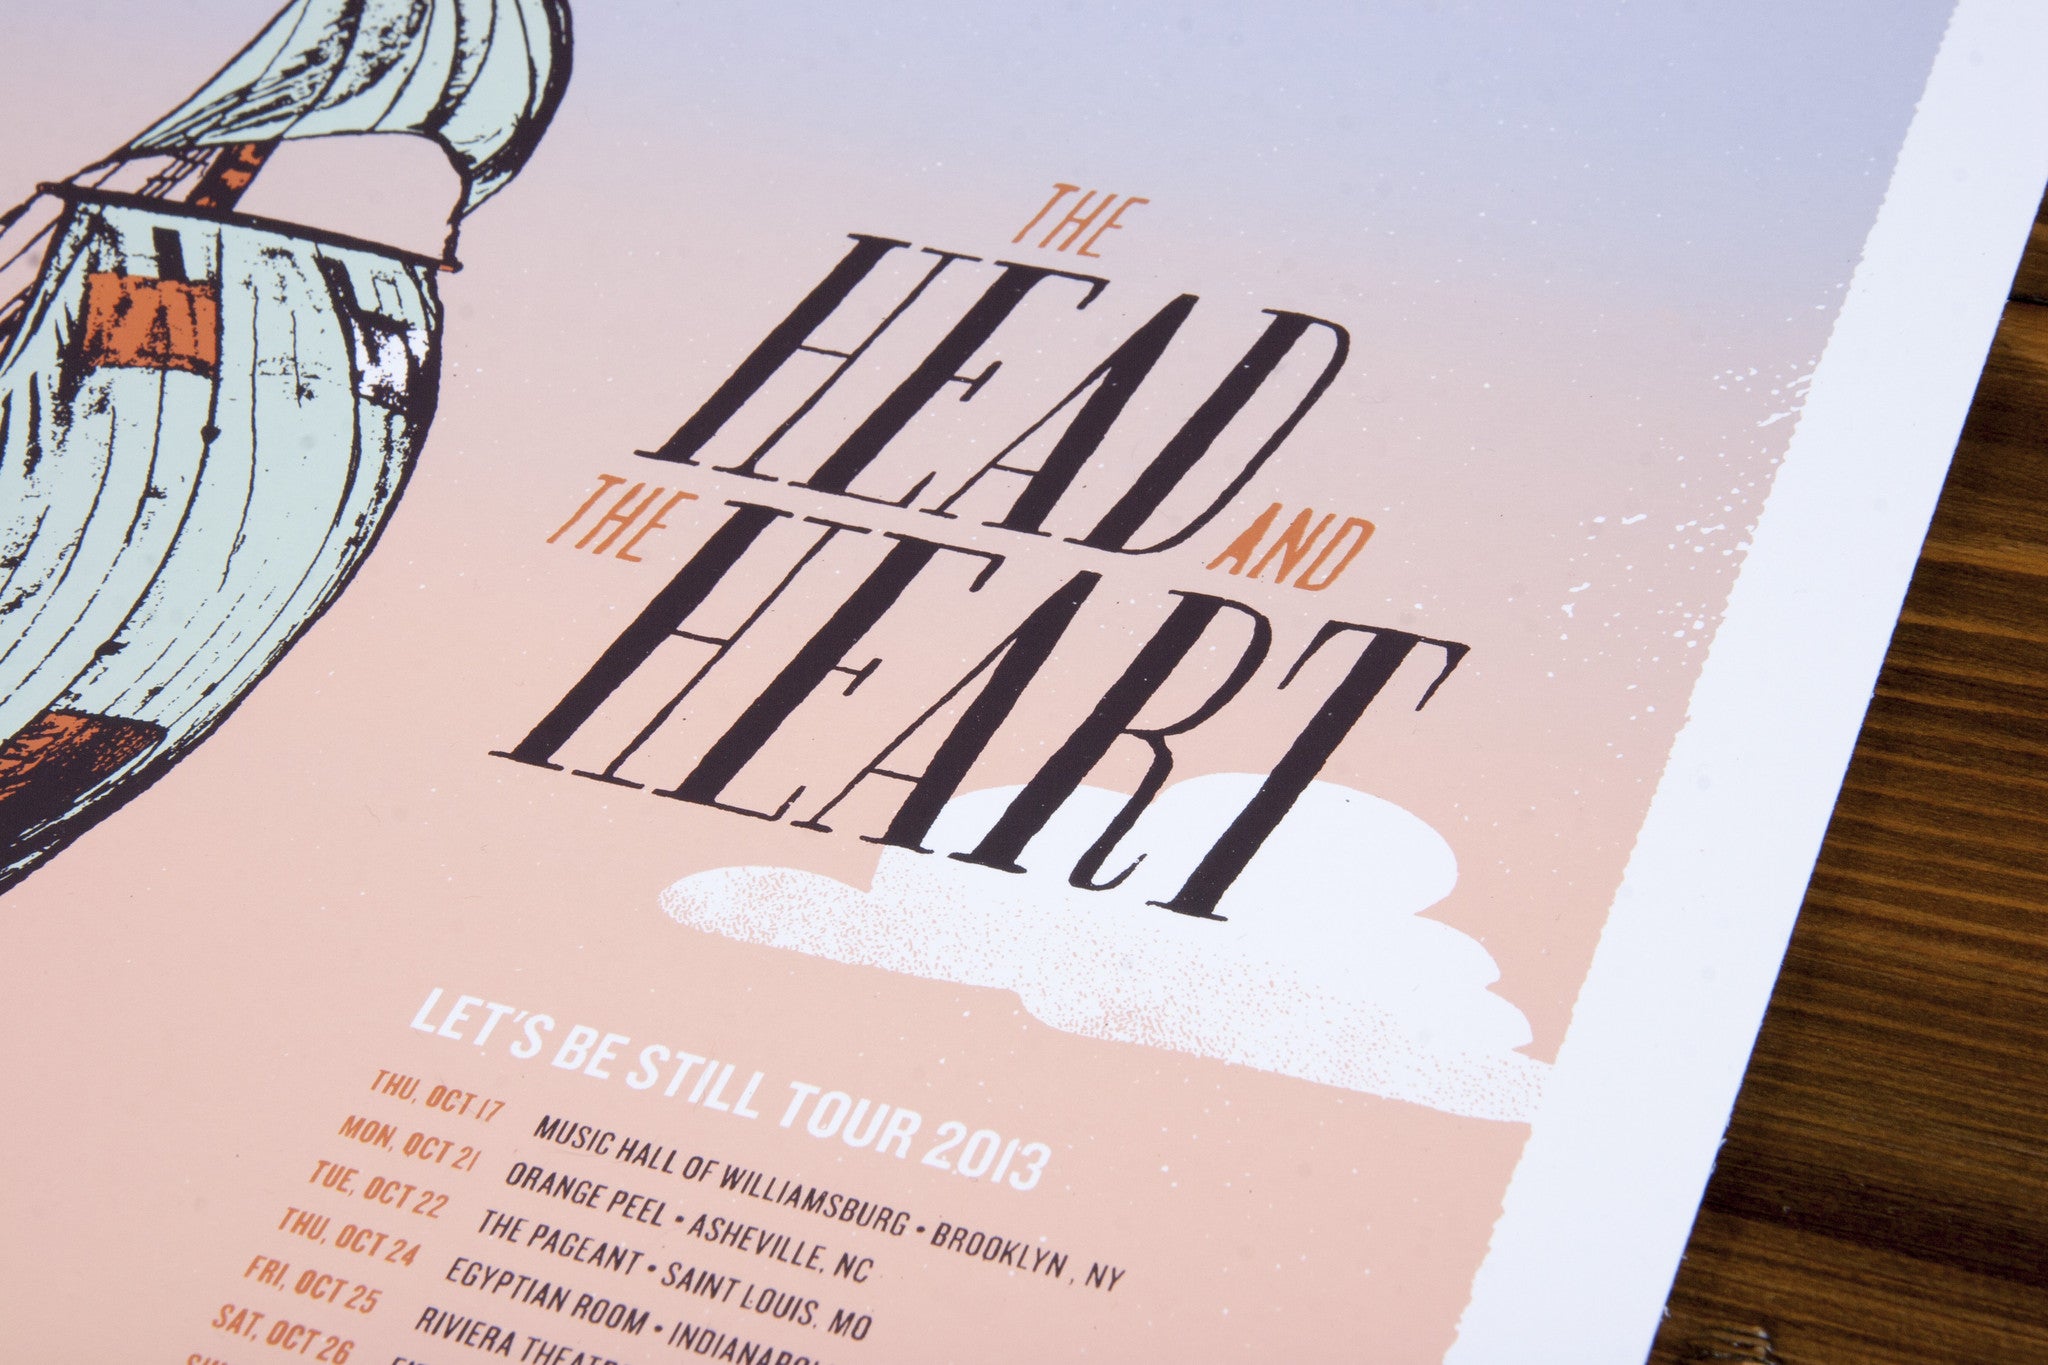 The Head and the Heart - Let's Be Still - Tour Poster